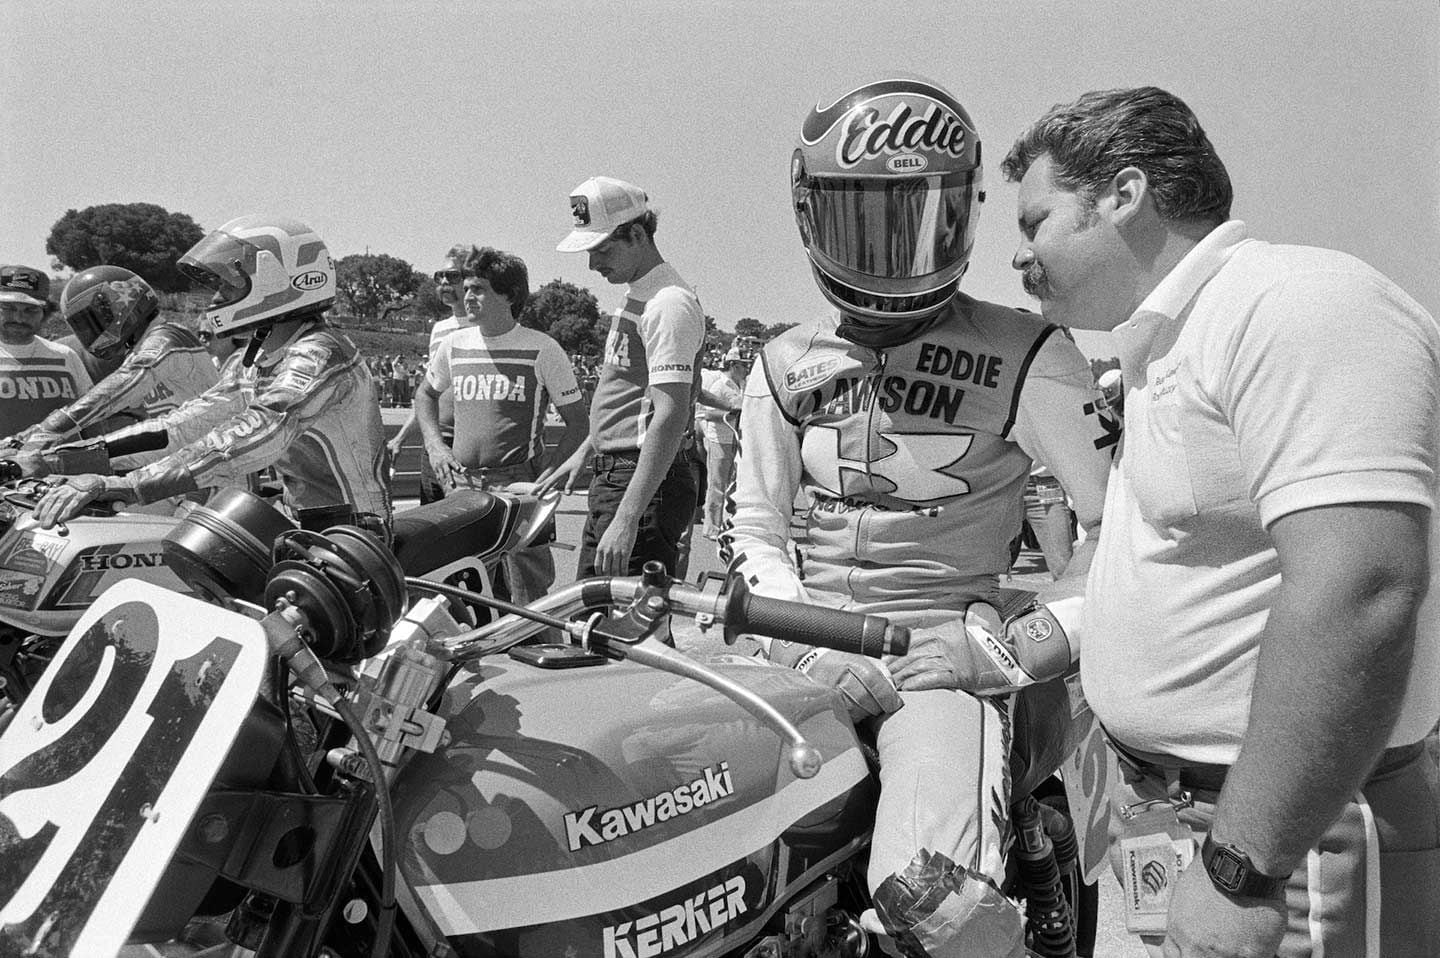 Owens’ action photography is excellent but he made a point to get moments in time like this with team boss Rob Muzzy talking to Eddie Lawson on his Kawasaki superbike. Photo reproduction in <i>Superbike</i> is excellent.